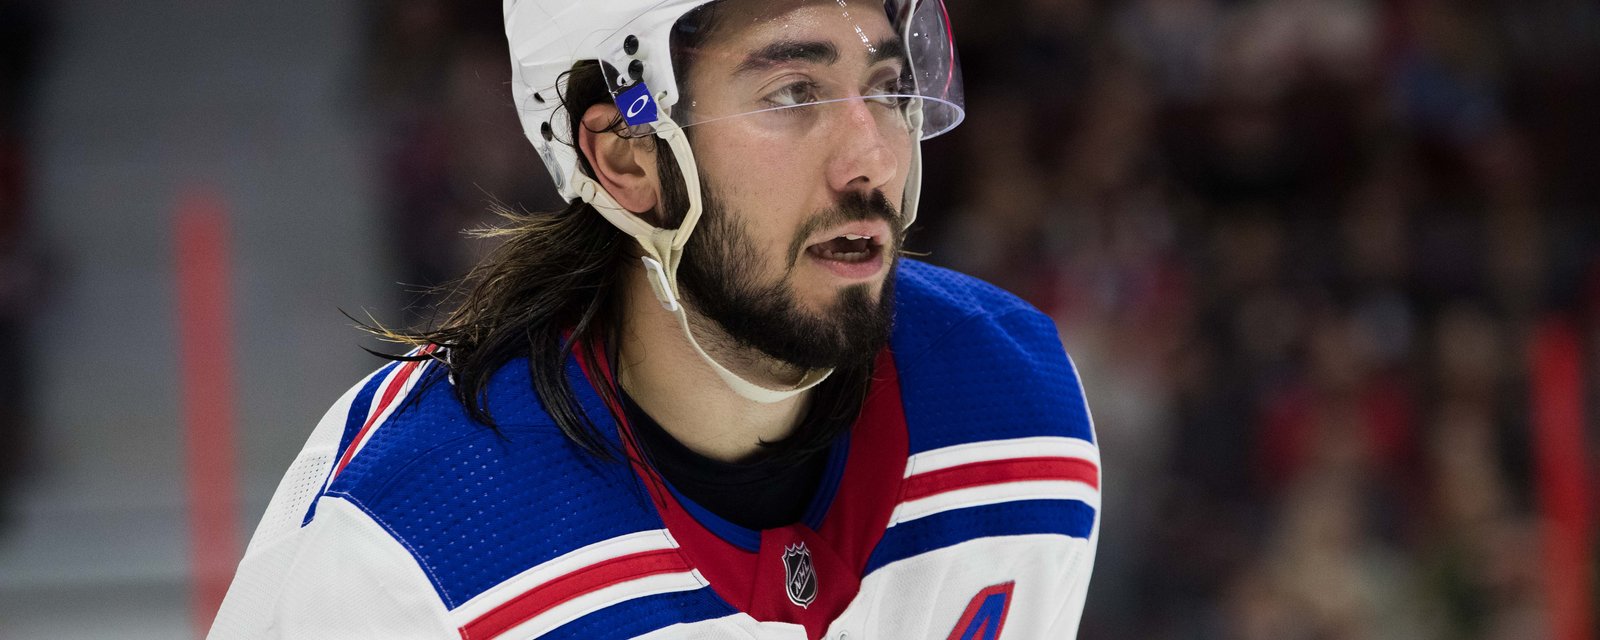 Rangers look to shock Preds still without Zibanejad